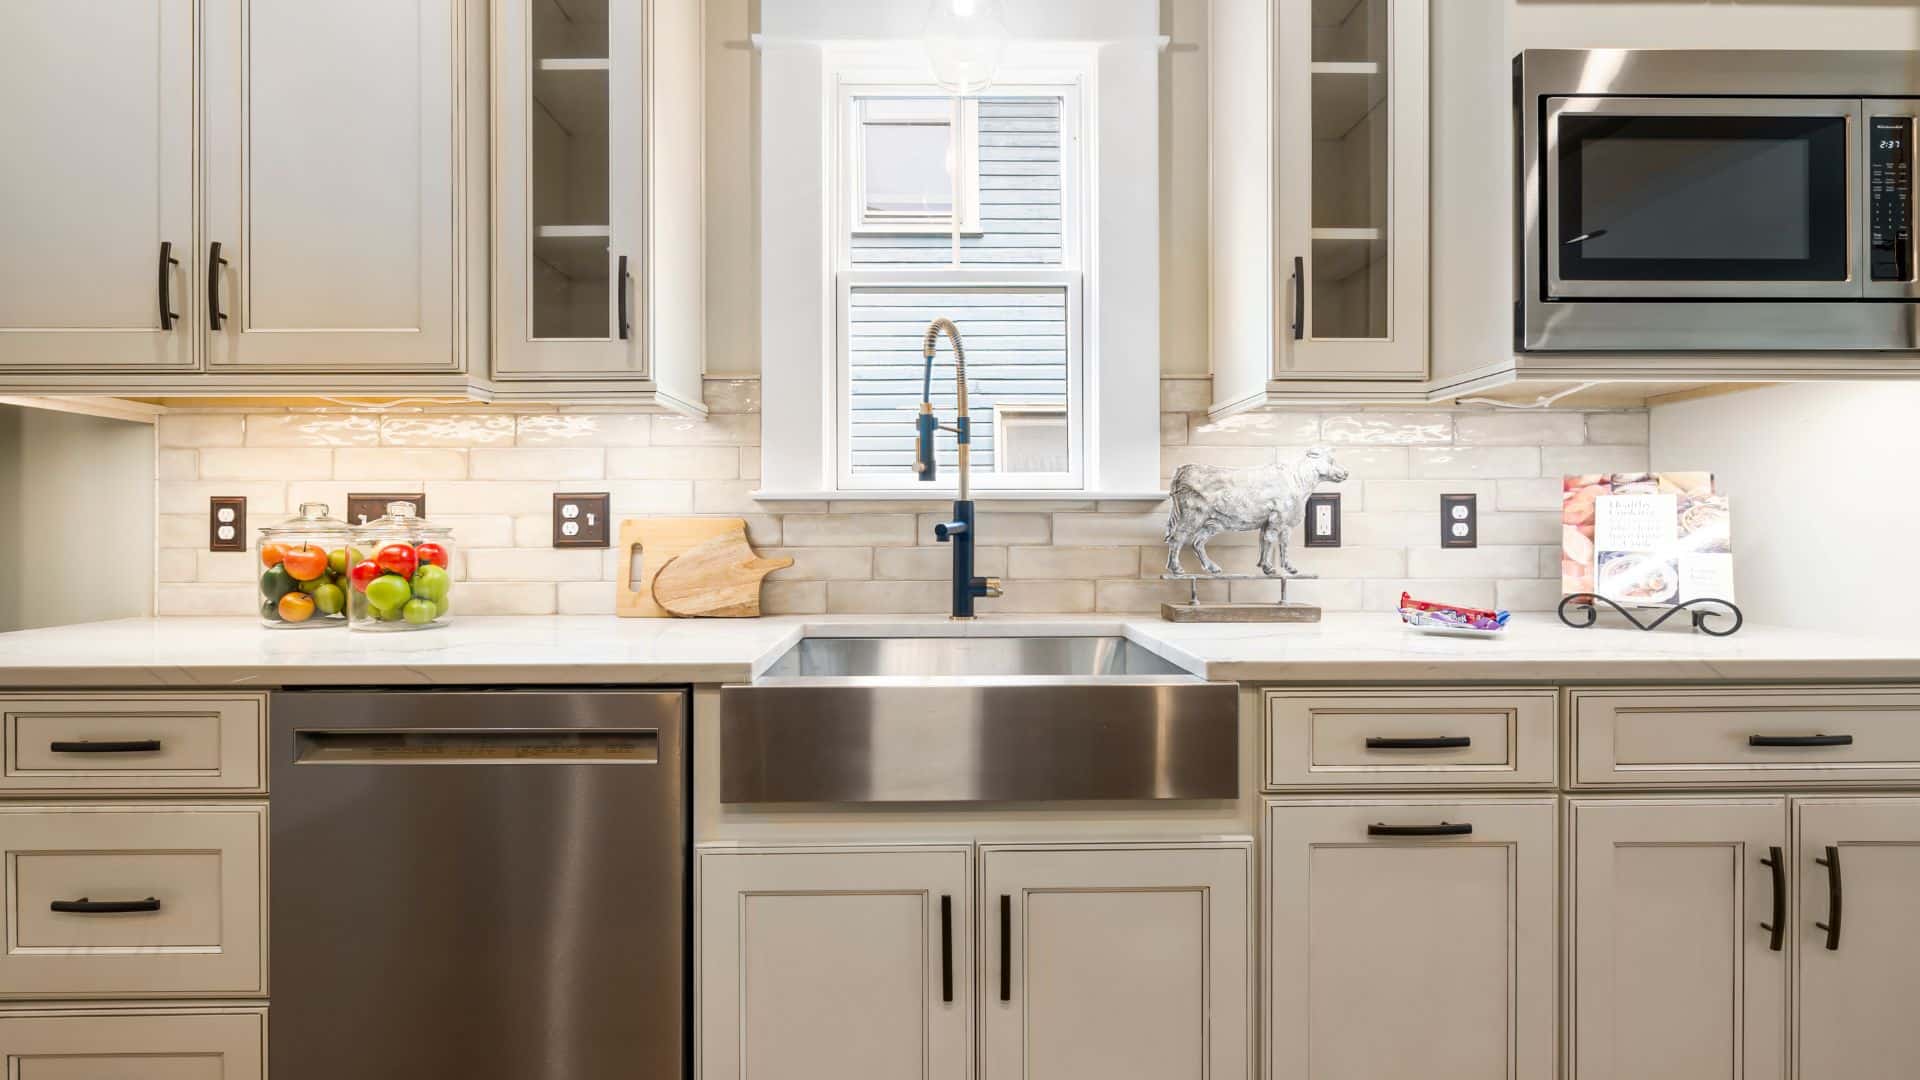 Off-white kitchen cabinets with countertops and tile backsplash